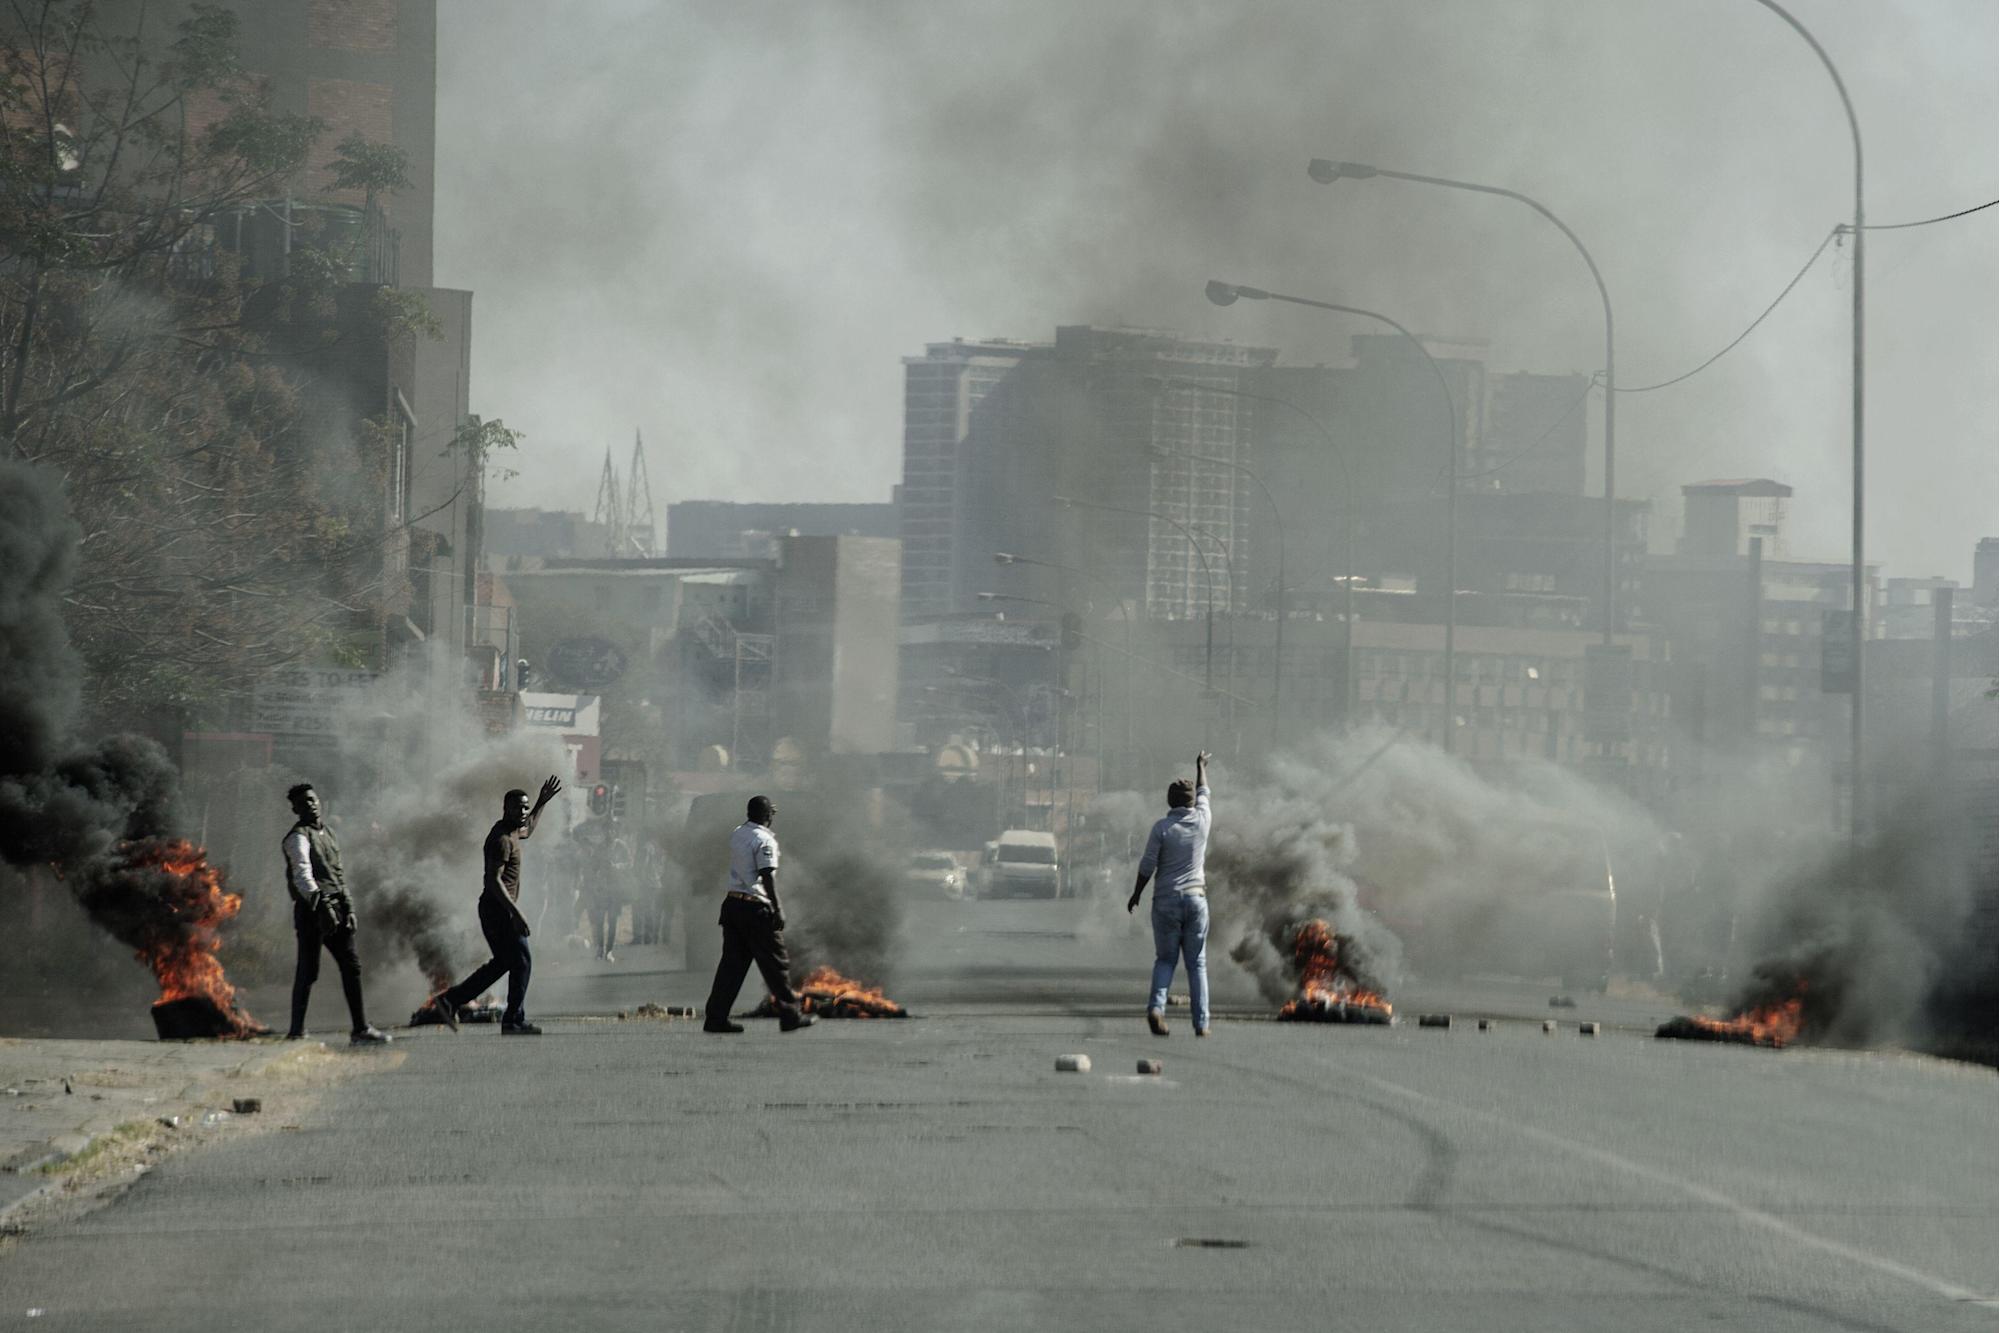 South Africa Deploys Military To Quell Riots